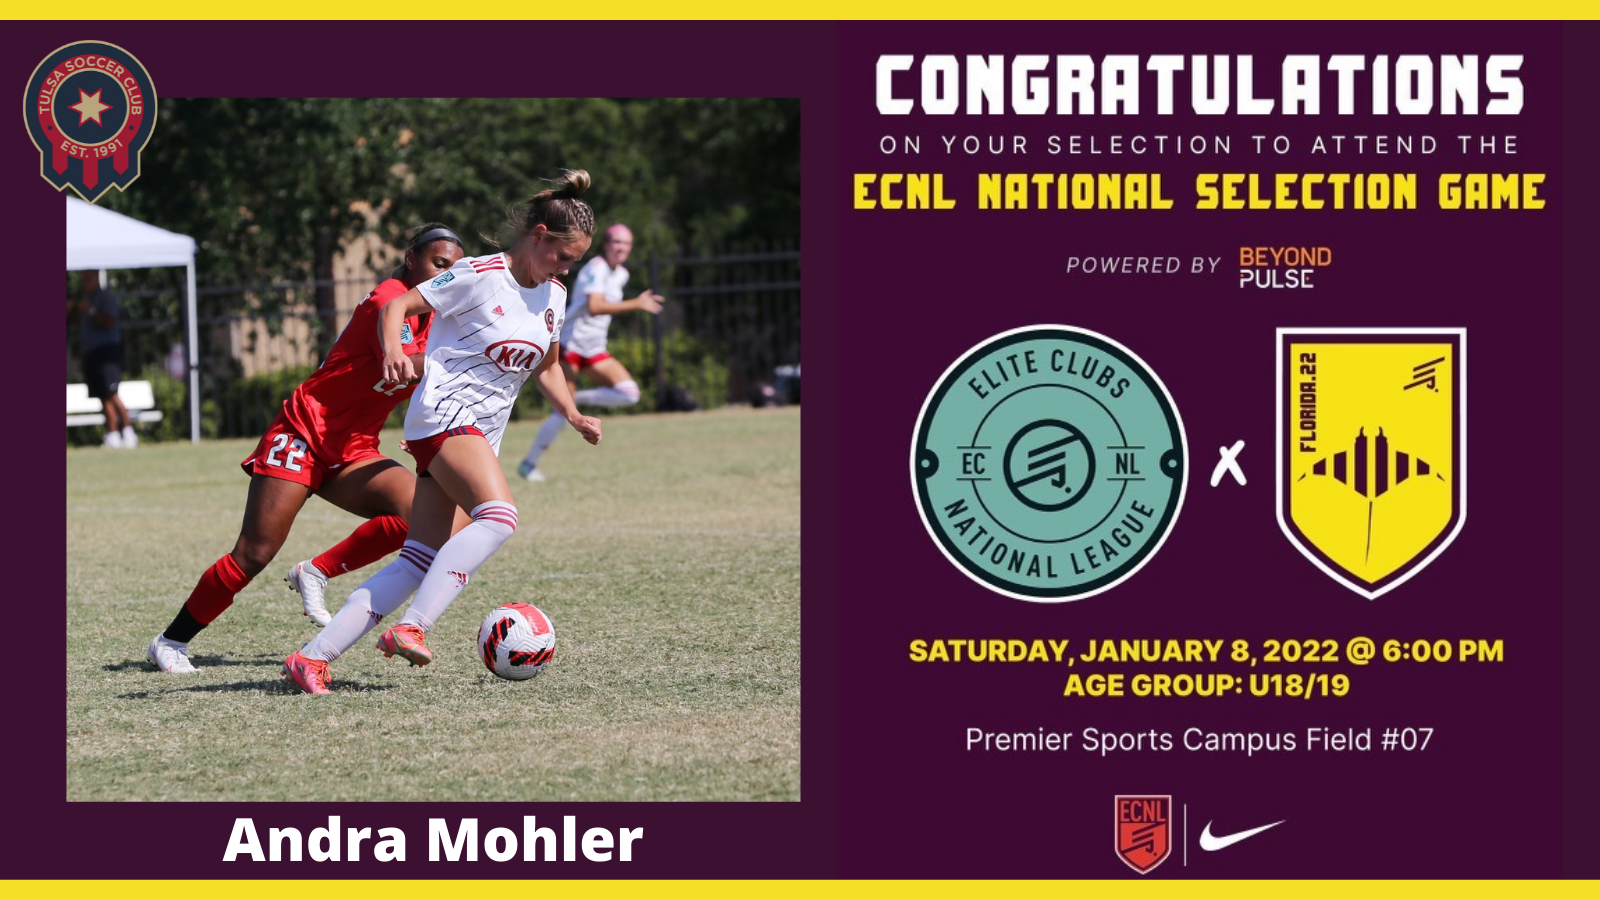 Andra Mohler selected for U18/U19 ECNL National Selection Game in Florida